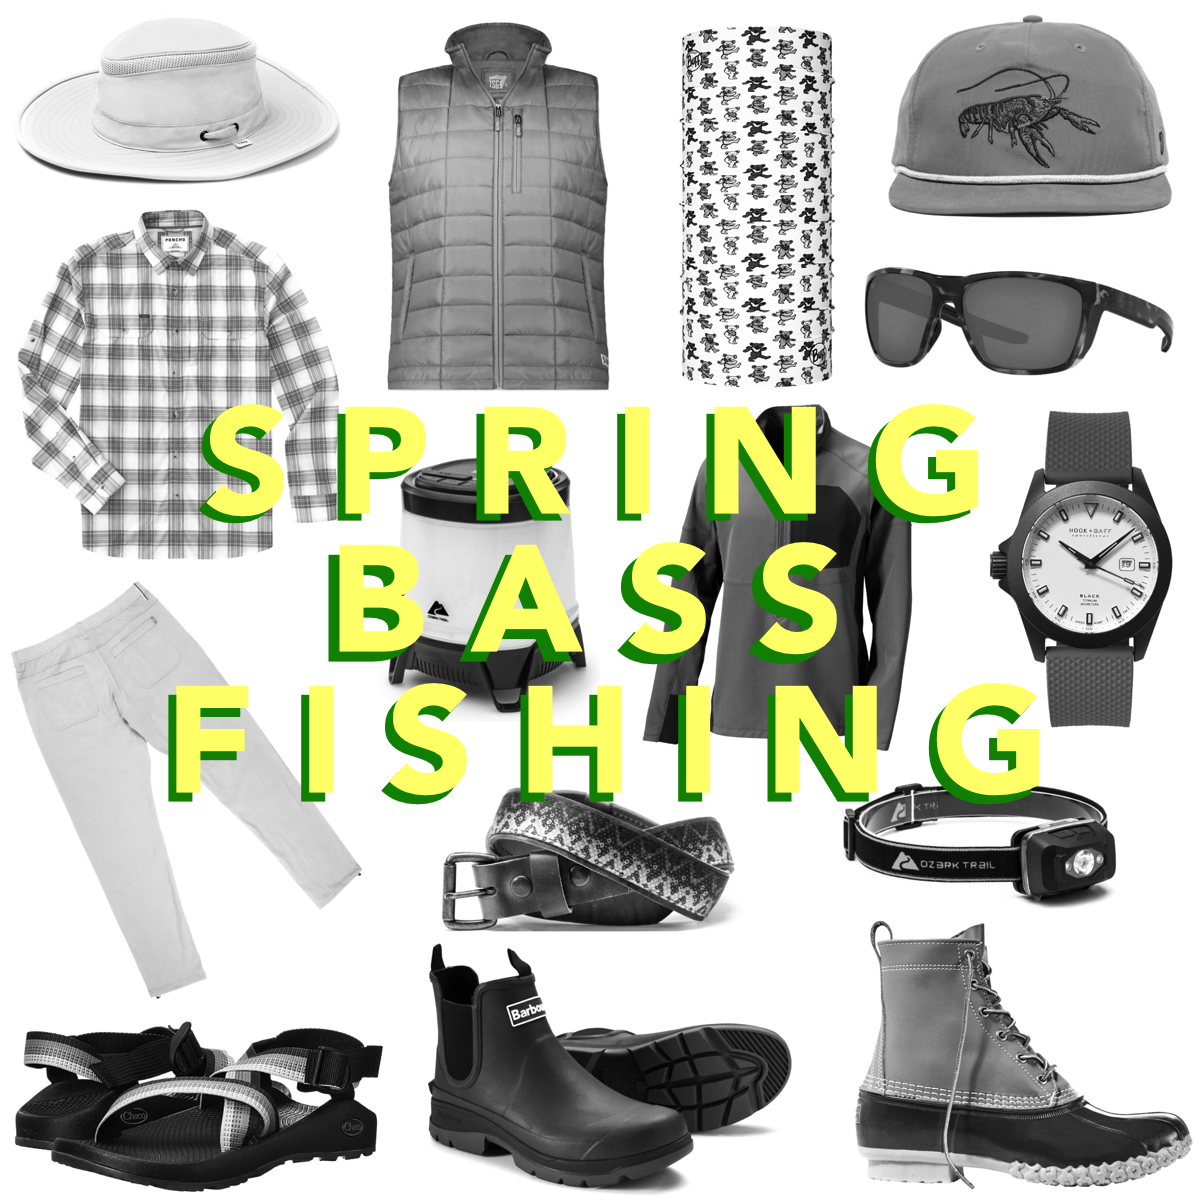 https://redclaysoul.com/wp-content/uploads/2023/03/Red-Clay-Soul-Spring-Bass-Fishing-3.png